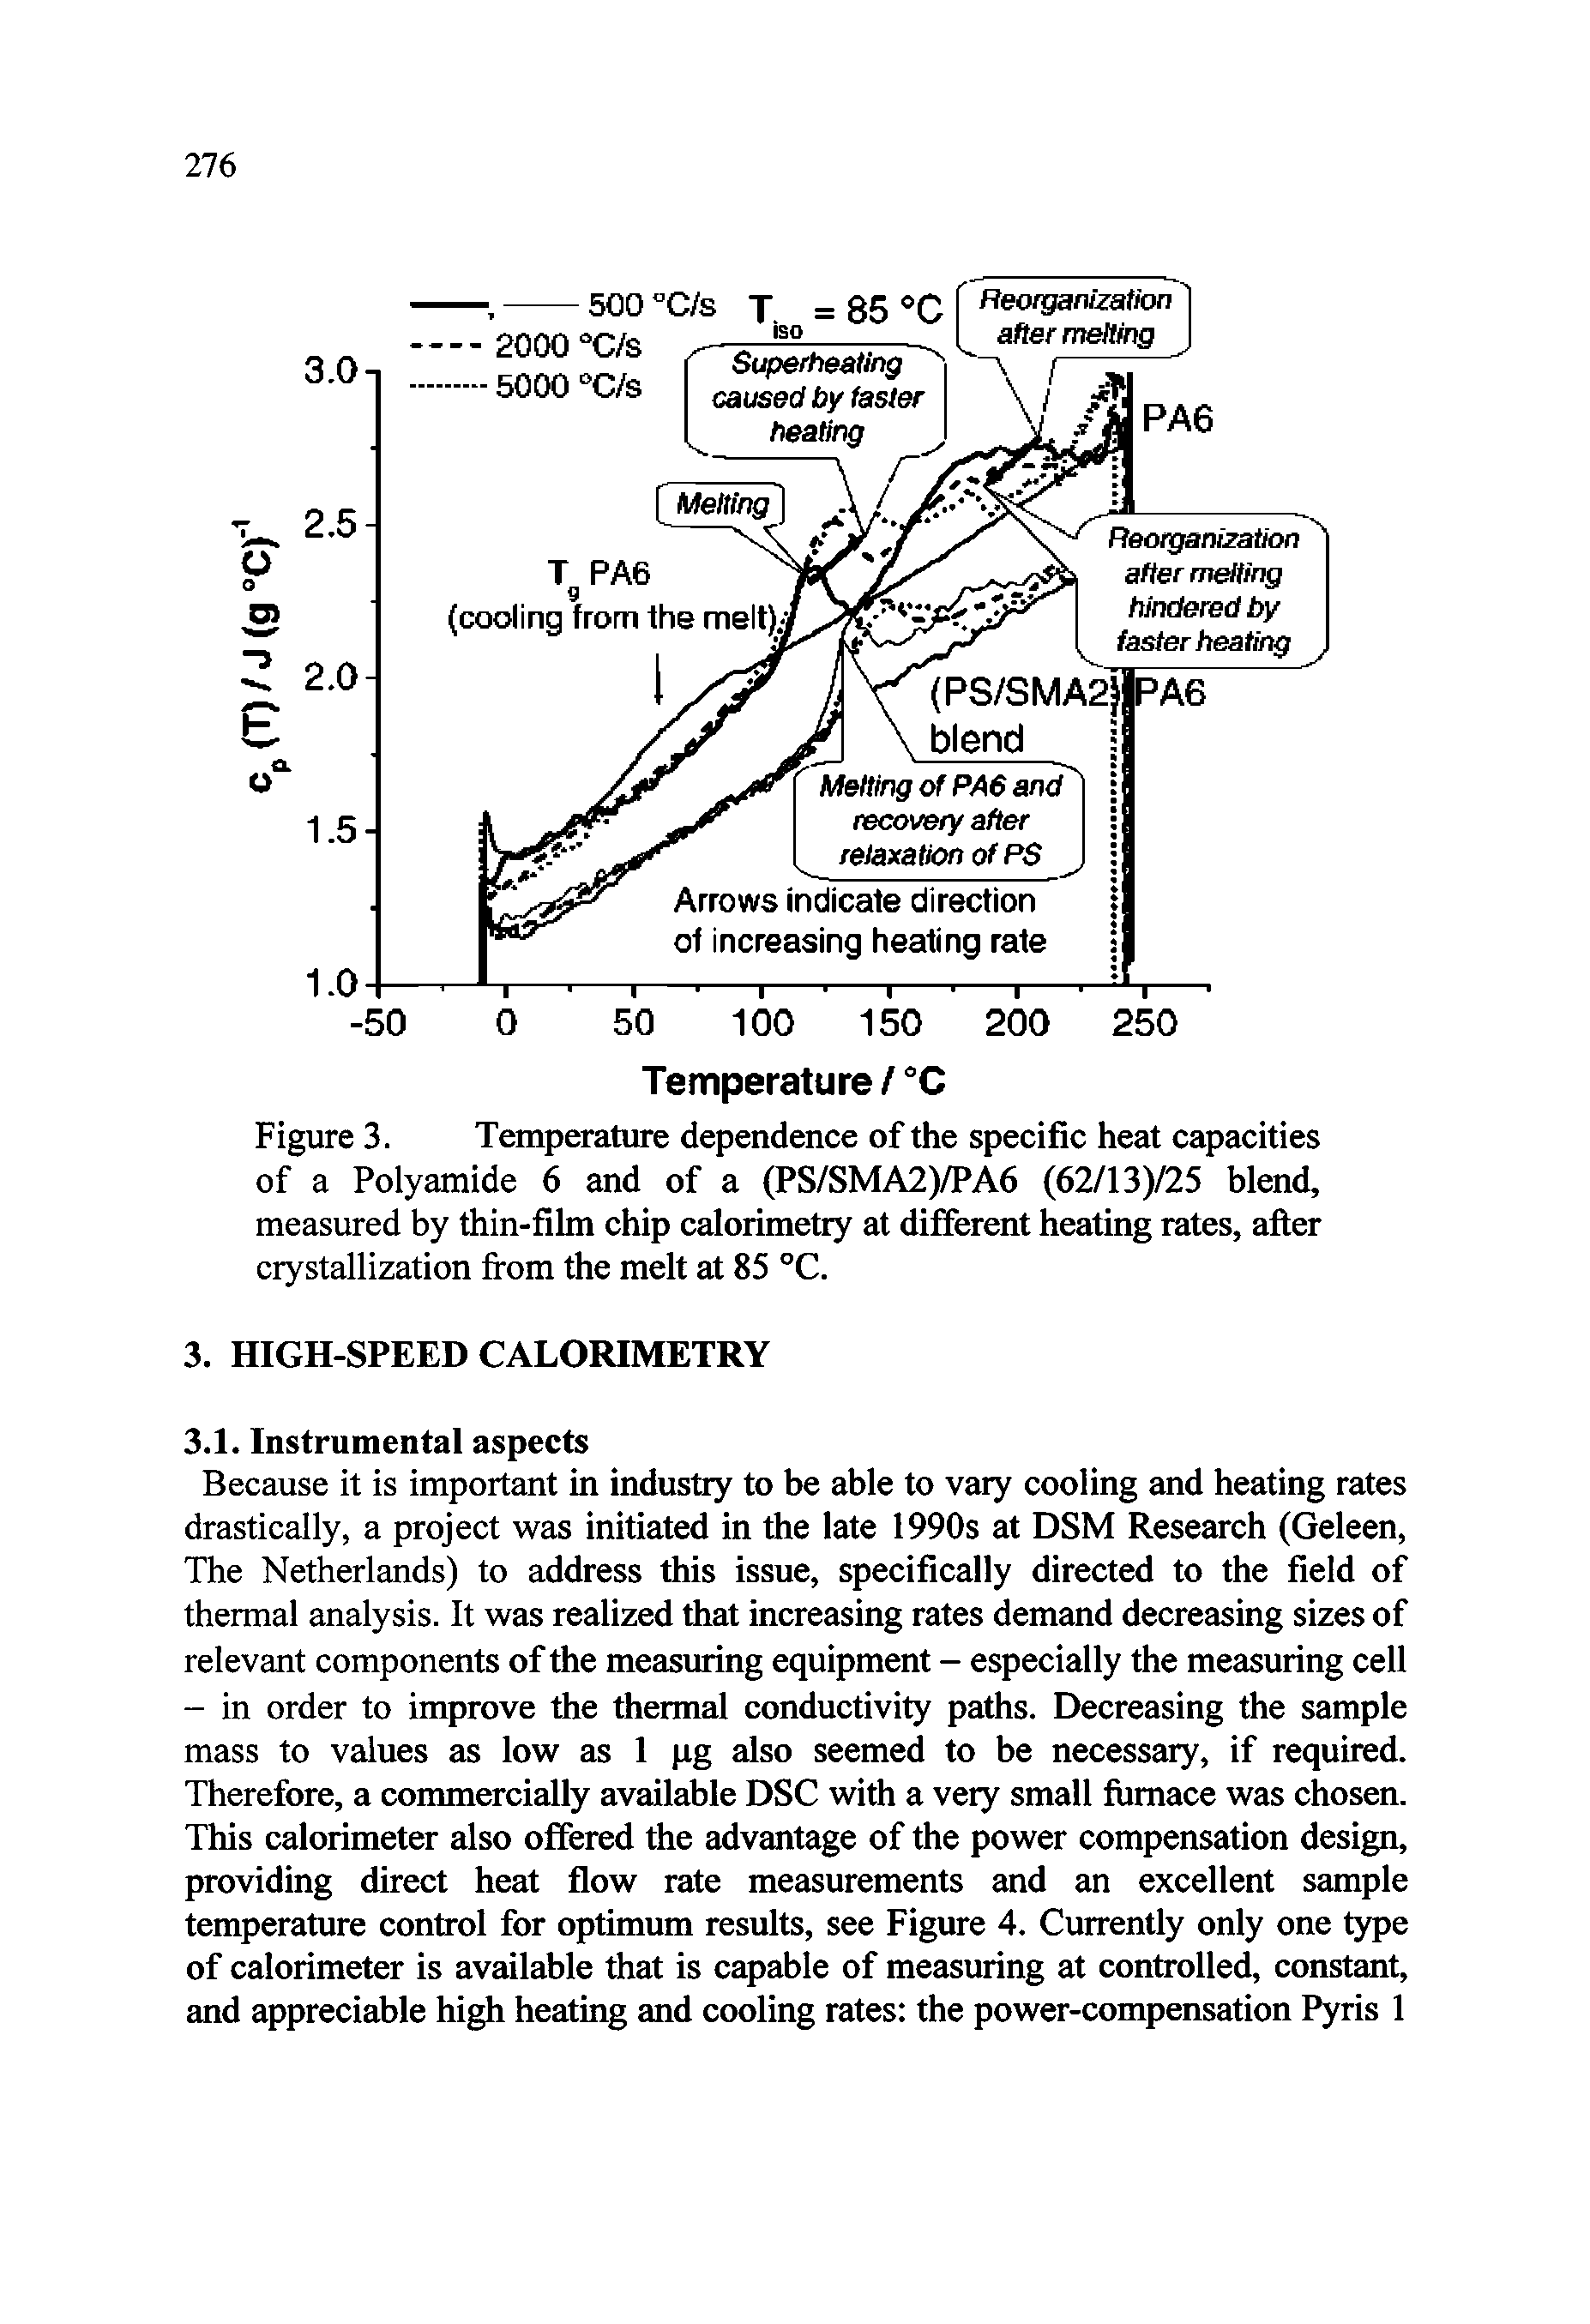 Figure 3. Temperature dependence of the specific heat capacities of a Polyamide 6 and of a (PS/SMA2)/PA6 (62/13) 5 blend, measured by thin-film chip calorimetry at different heating rates, after crystallization from the melt at 85 C.